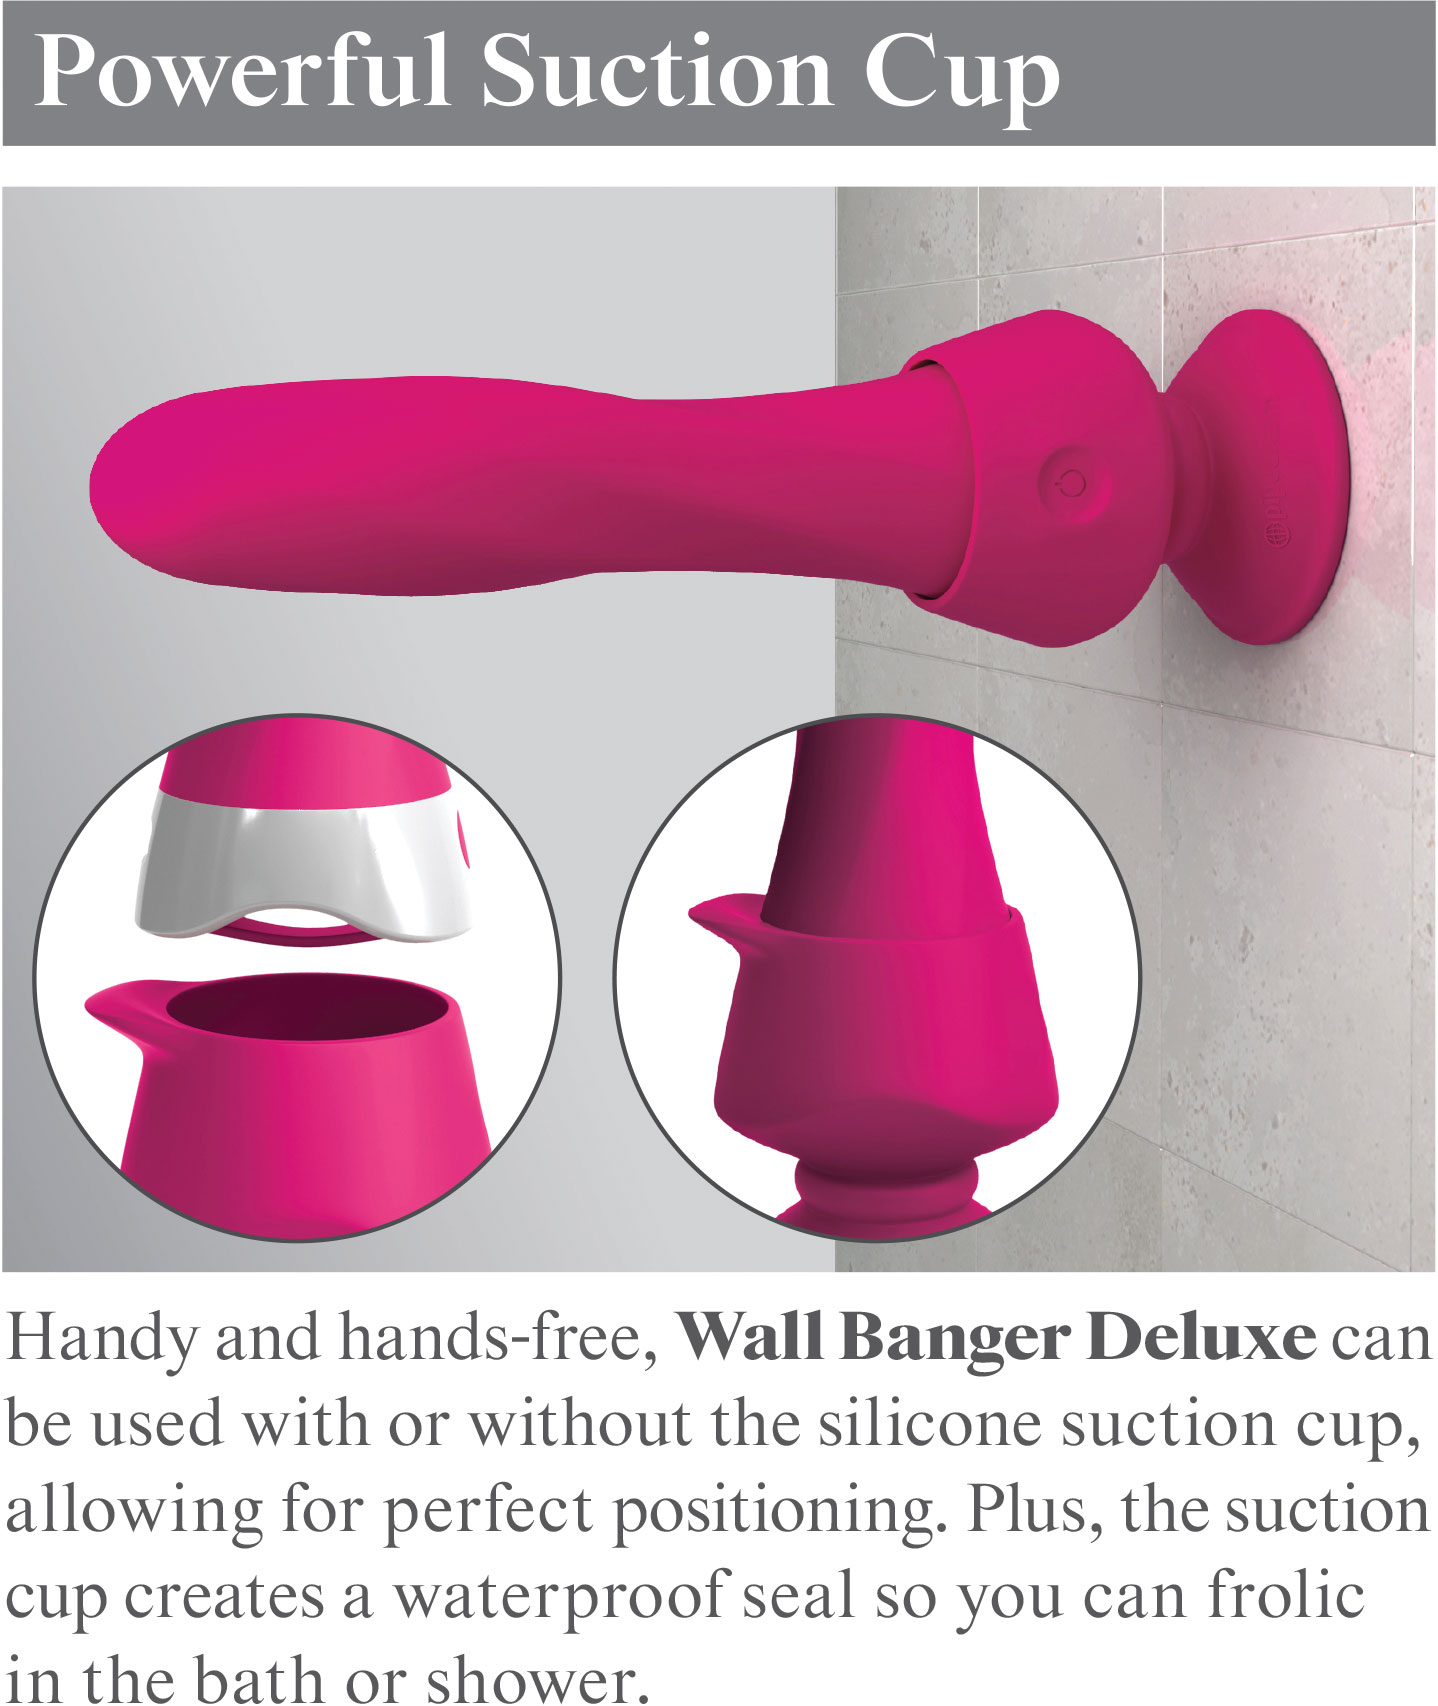 3Some Wall Banger Deluxe Rechargeable Remote Controlled Silicone Vibrator - Powerful Suction Cup